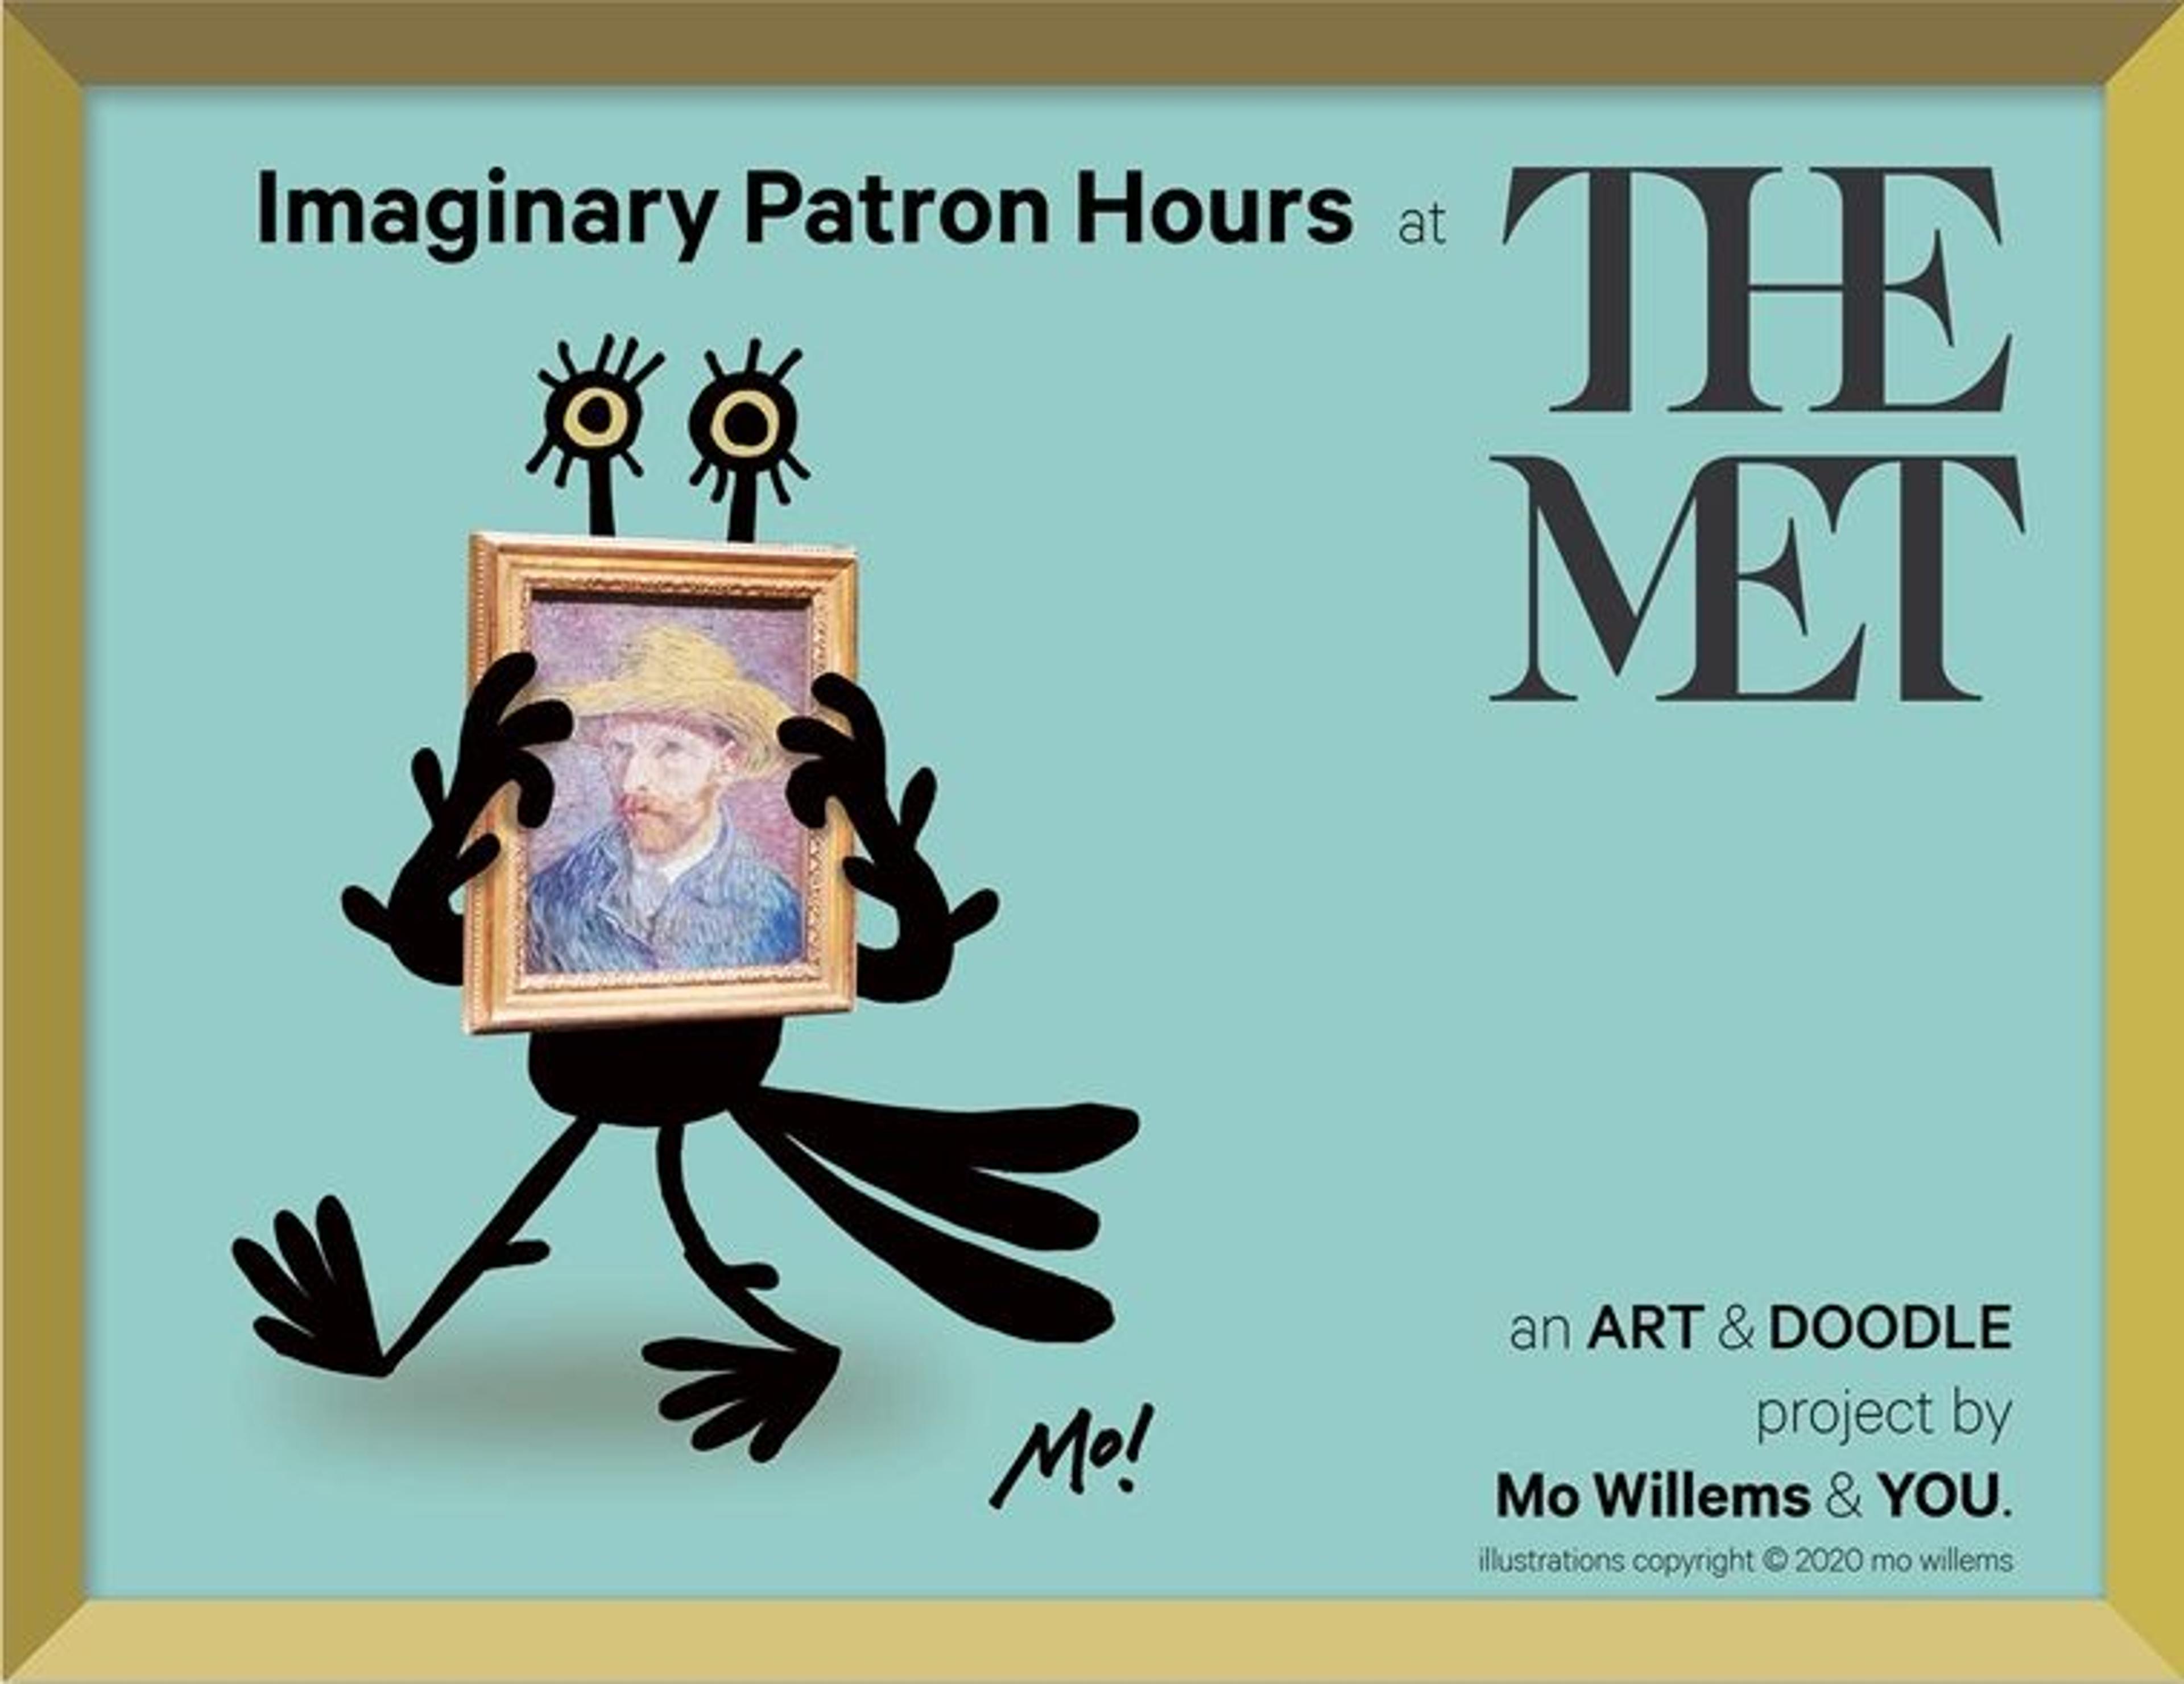 In front of a teal background, a bird-like cartoon creature with eyes on stalks grasps a self-portrait by Vincent van Gogh. Text above reads "Imaginary Patron Hours. Text to the left reads "THE MET. An Art and Doodle project by Mo Willems and You."